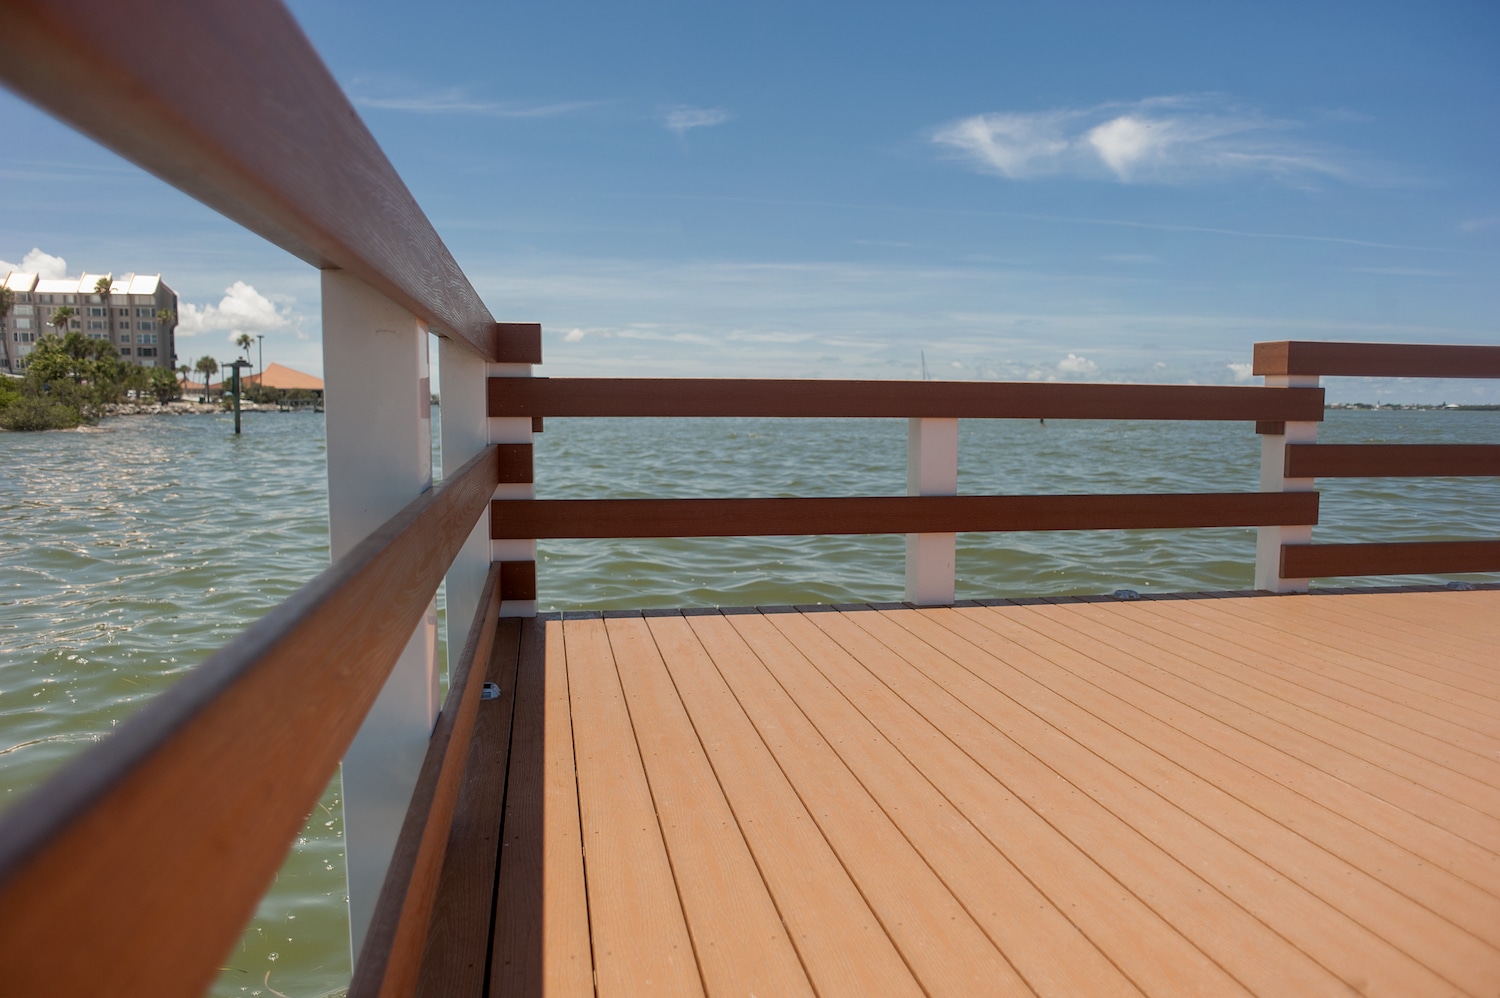 wood or composite decking, Wood or Composite Decking: Which is Best?